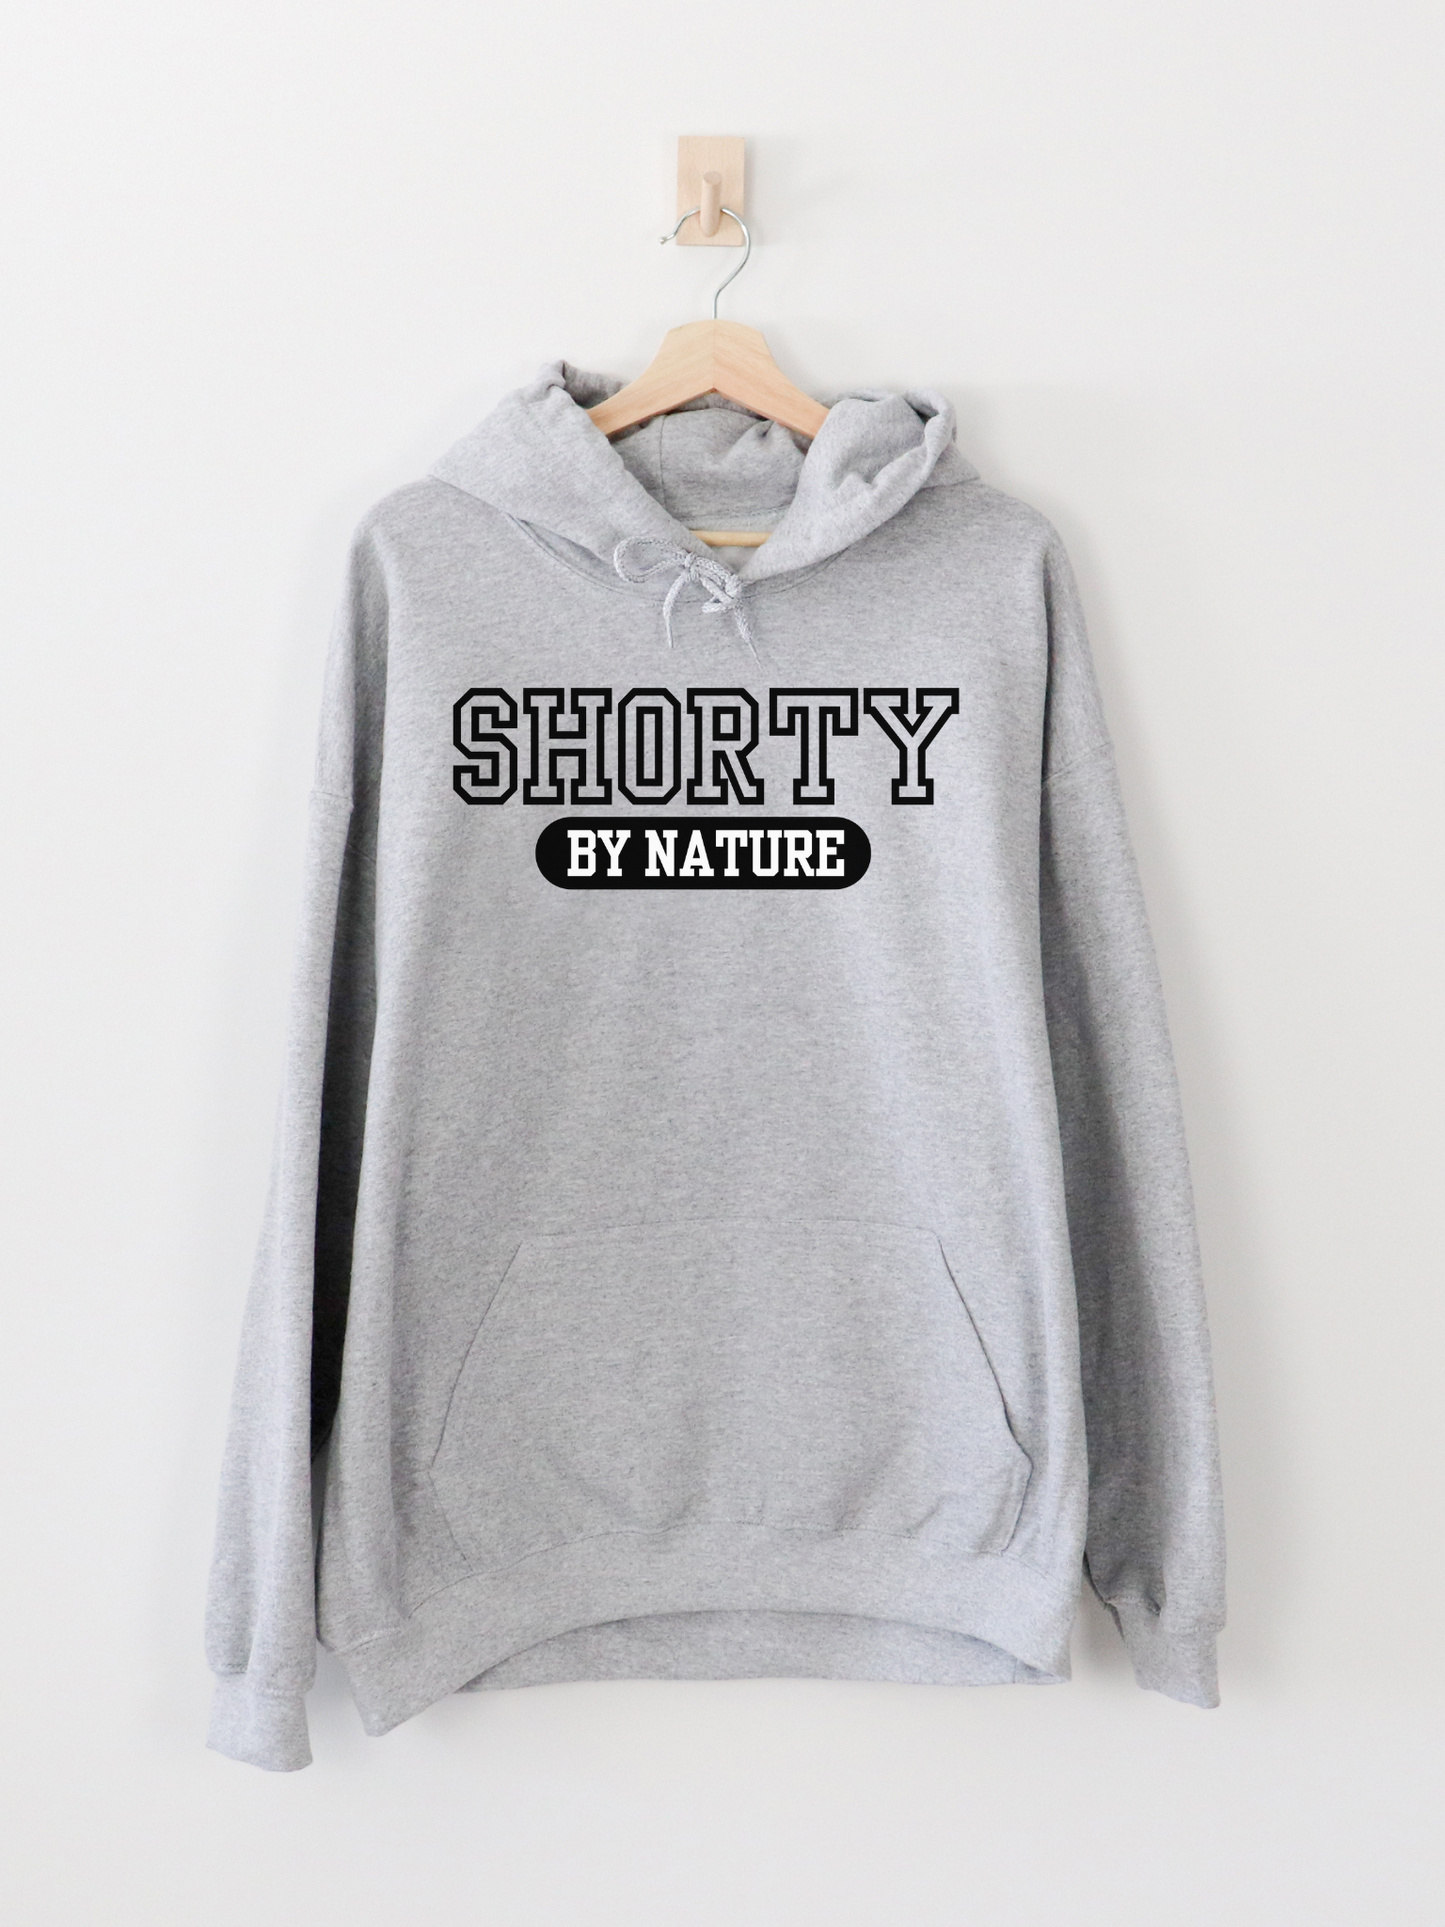 Shorty Sport Youth Hoodie